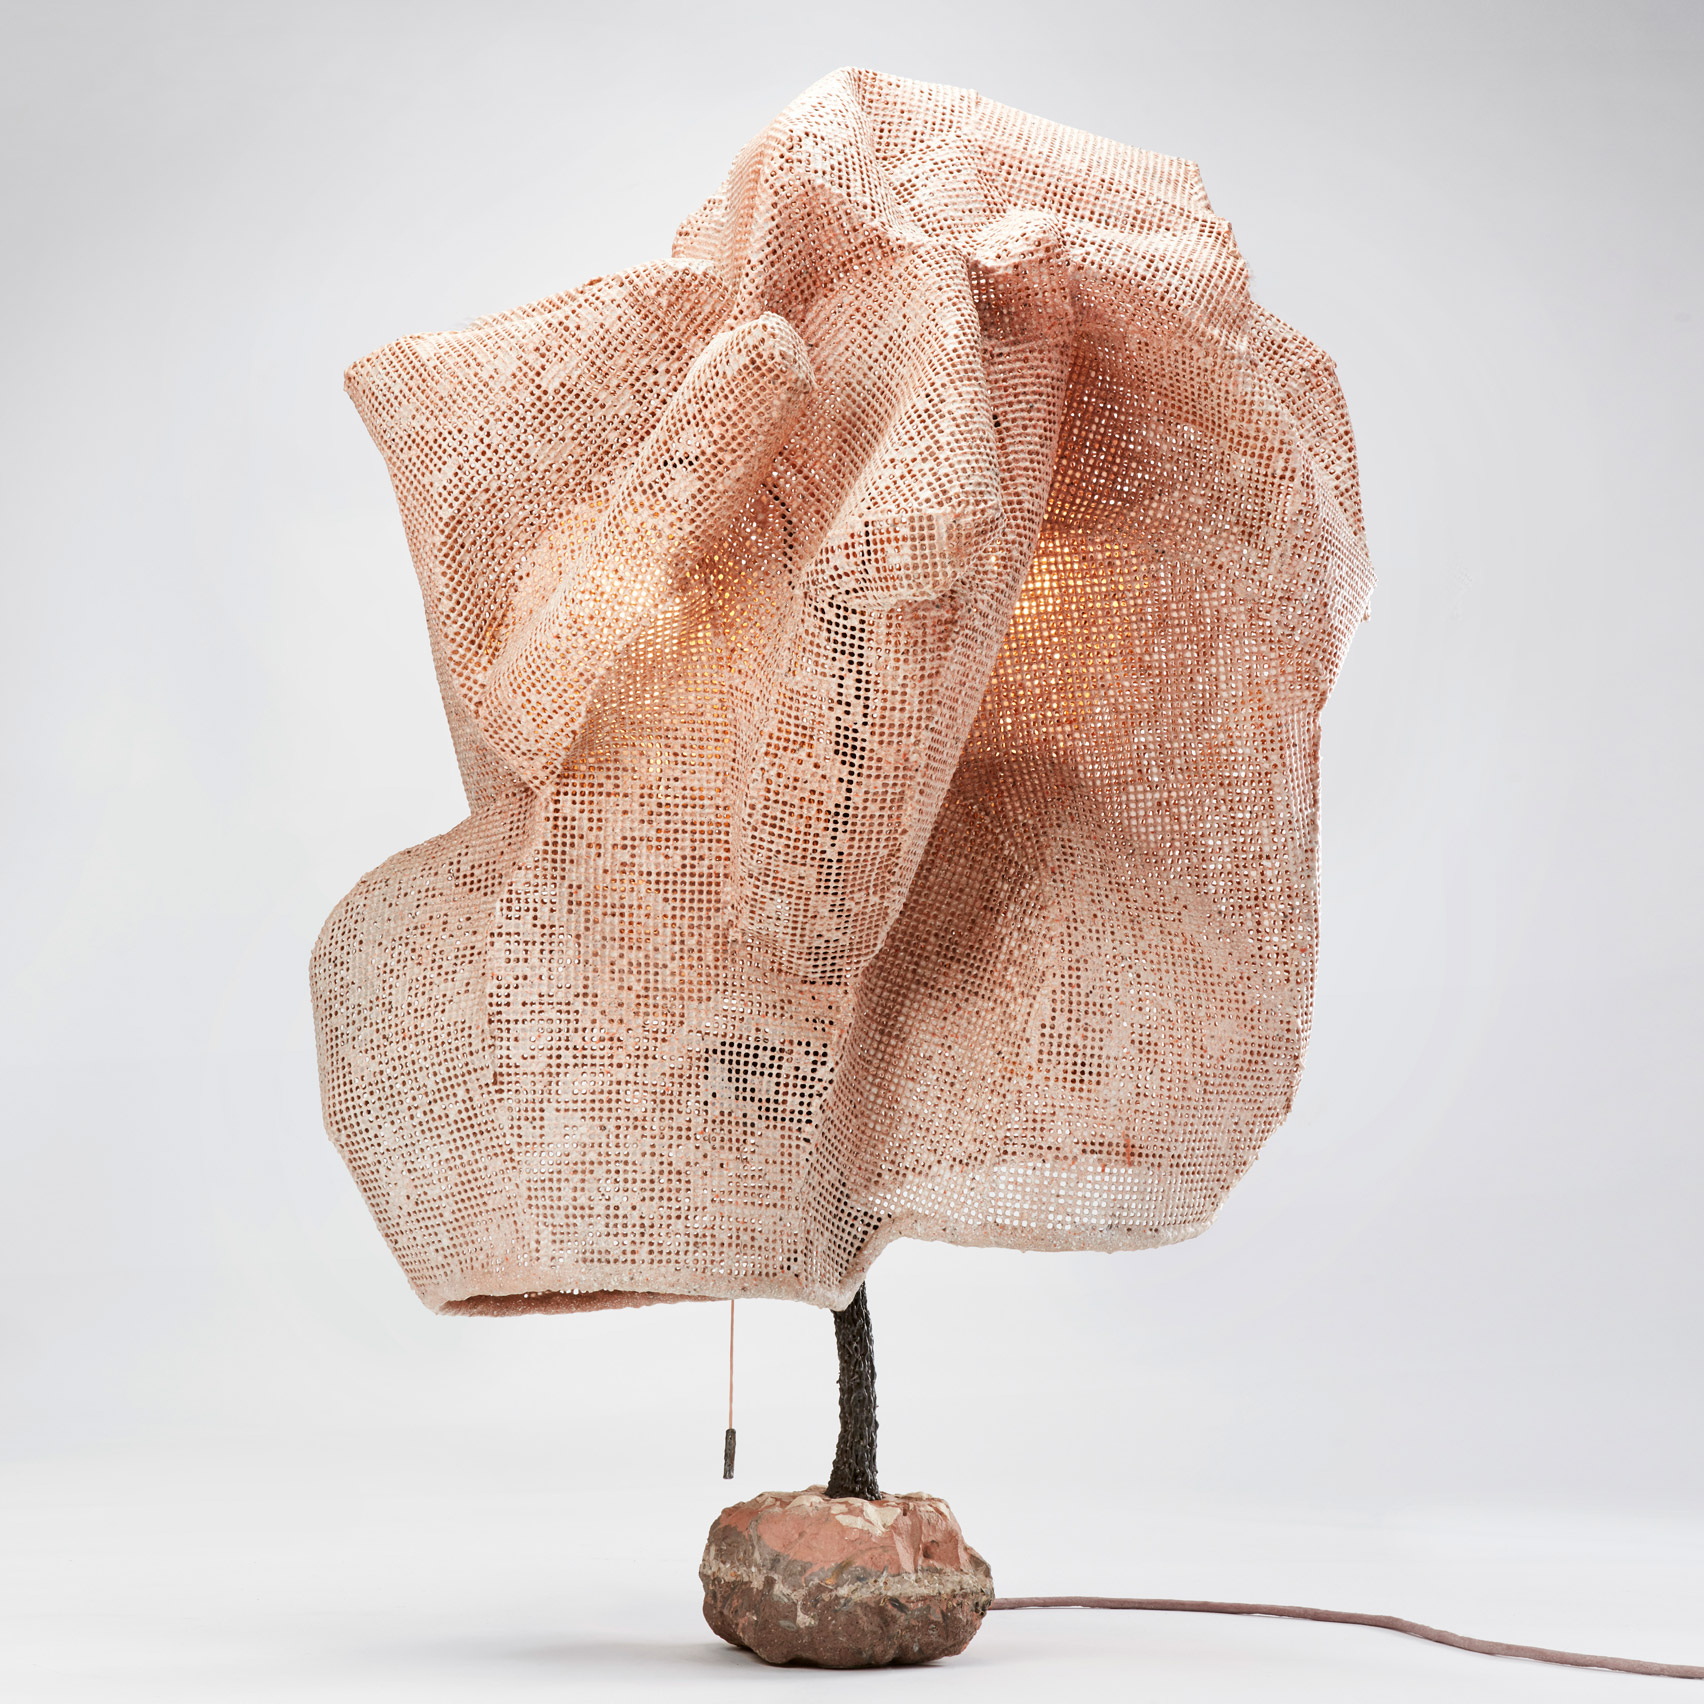 Light Mesh Series by Nacho Carbonell